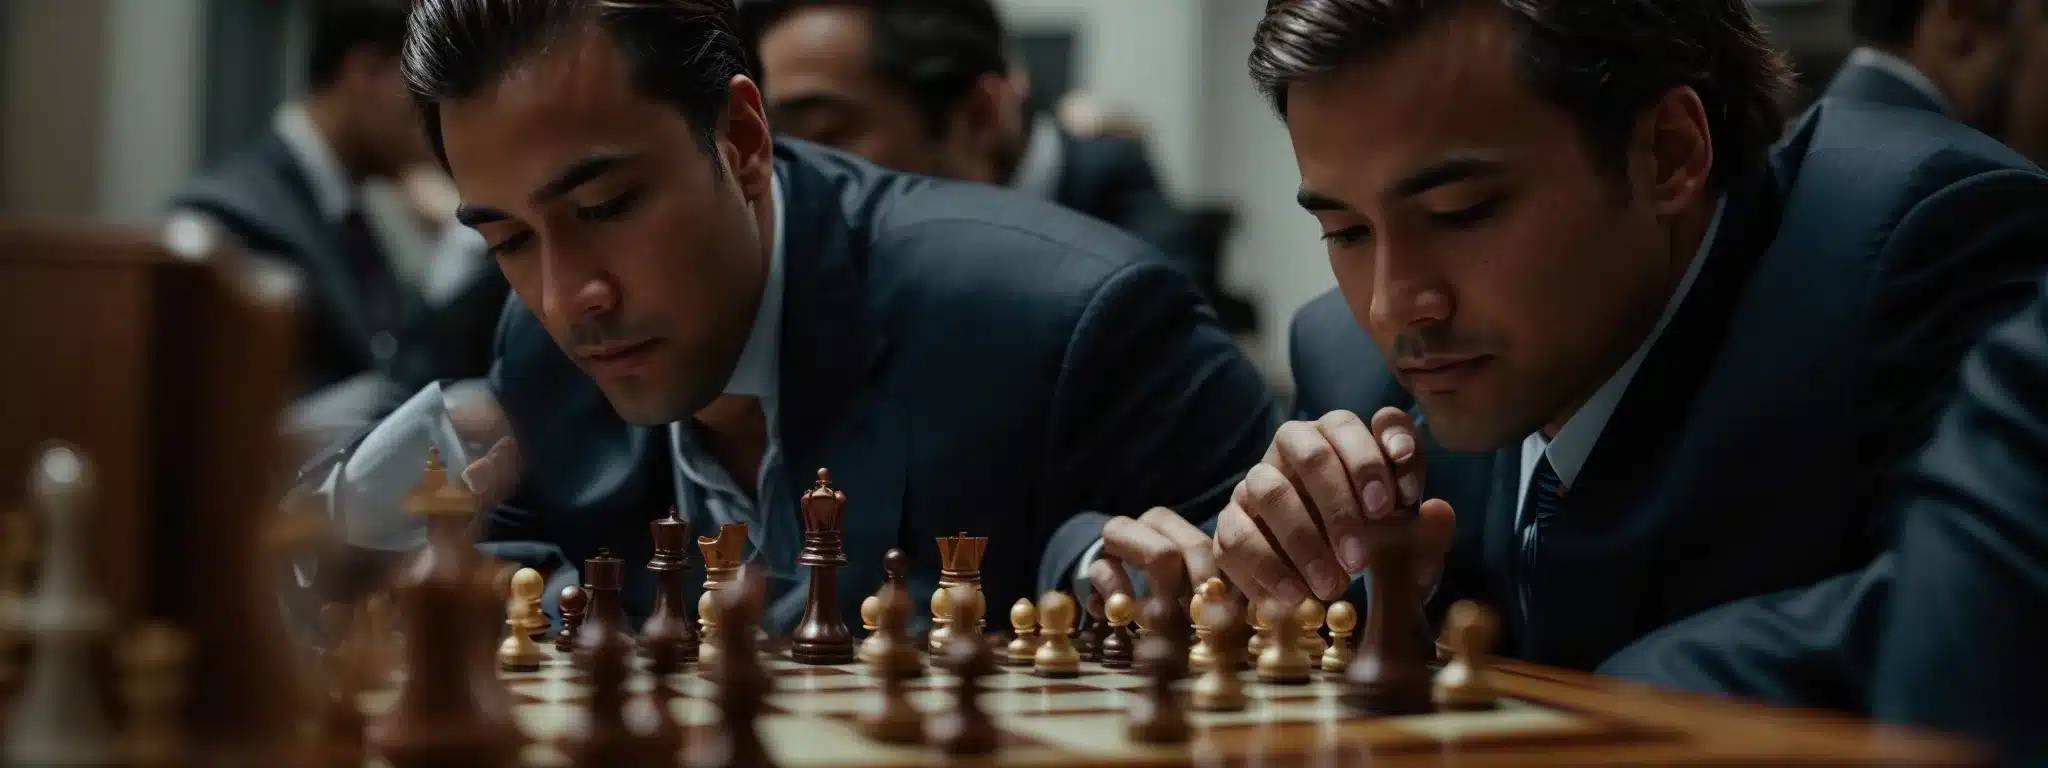 A Close-Up Of Two Business Professionals Over A Chess Game, Deeply Focused And Strategizing.